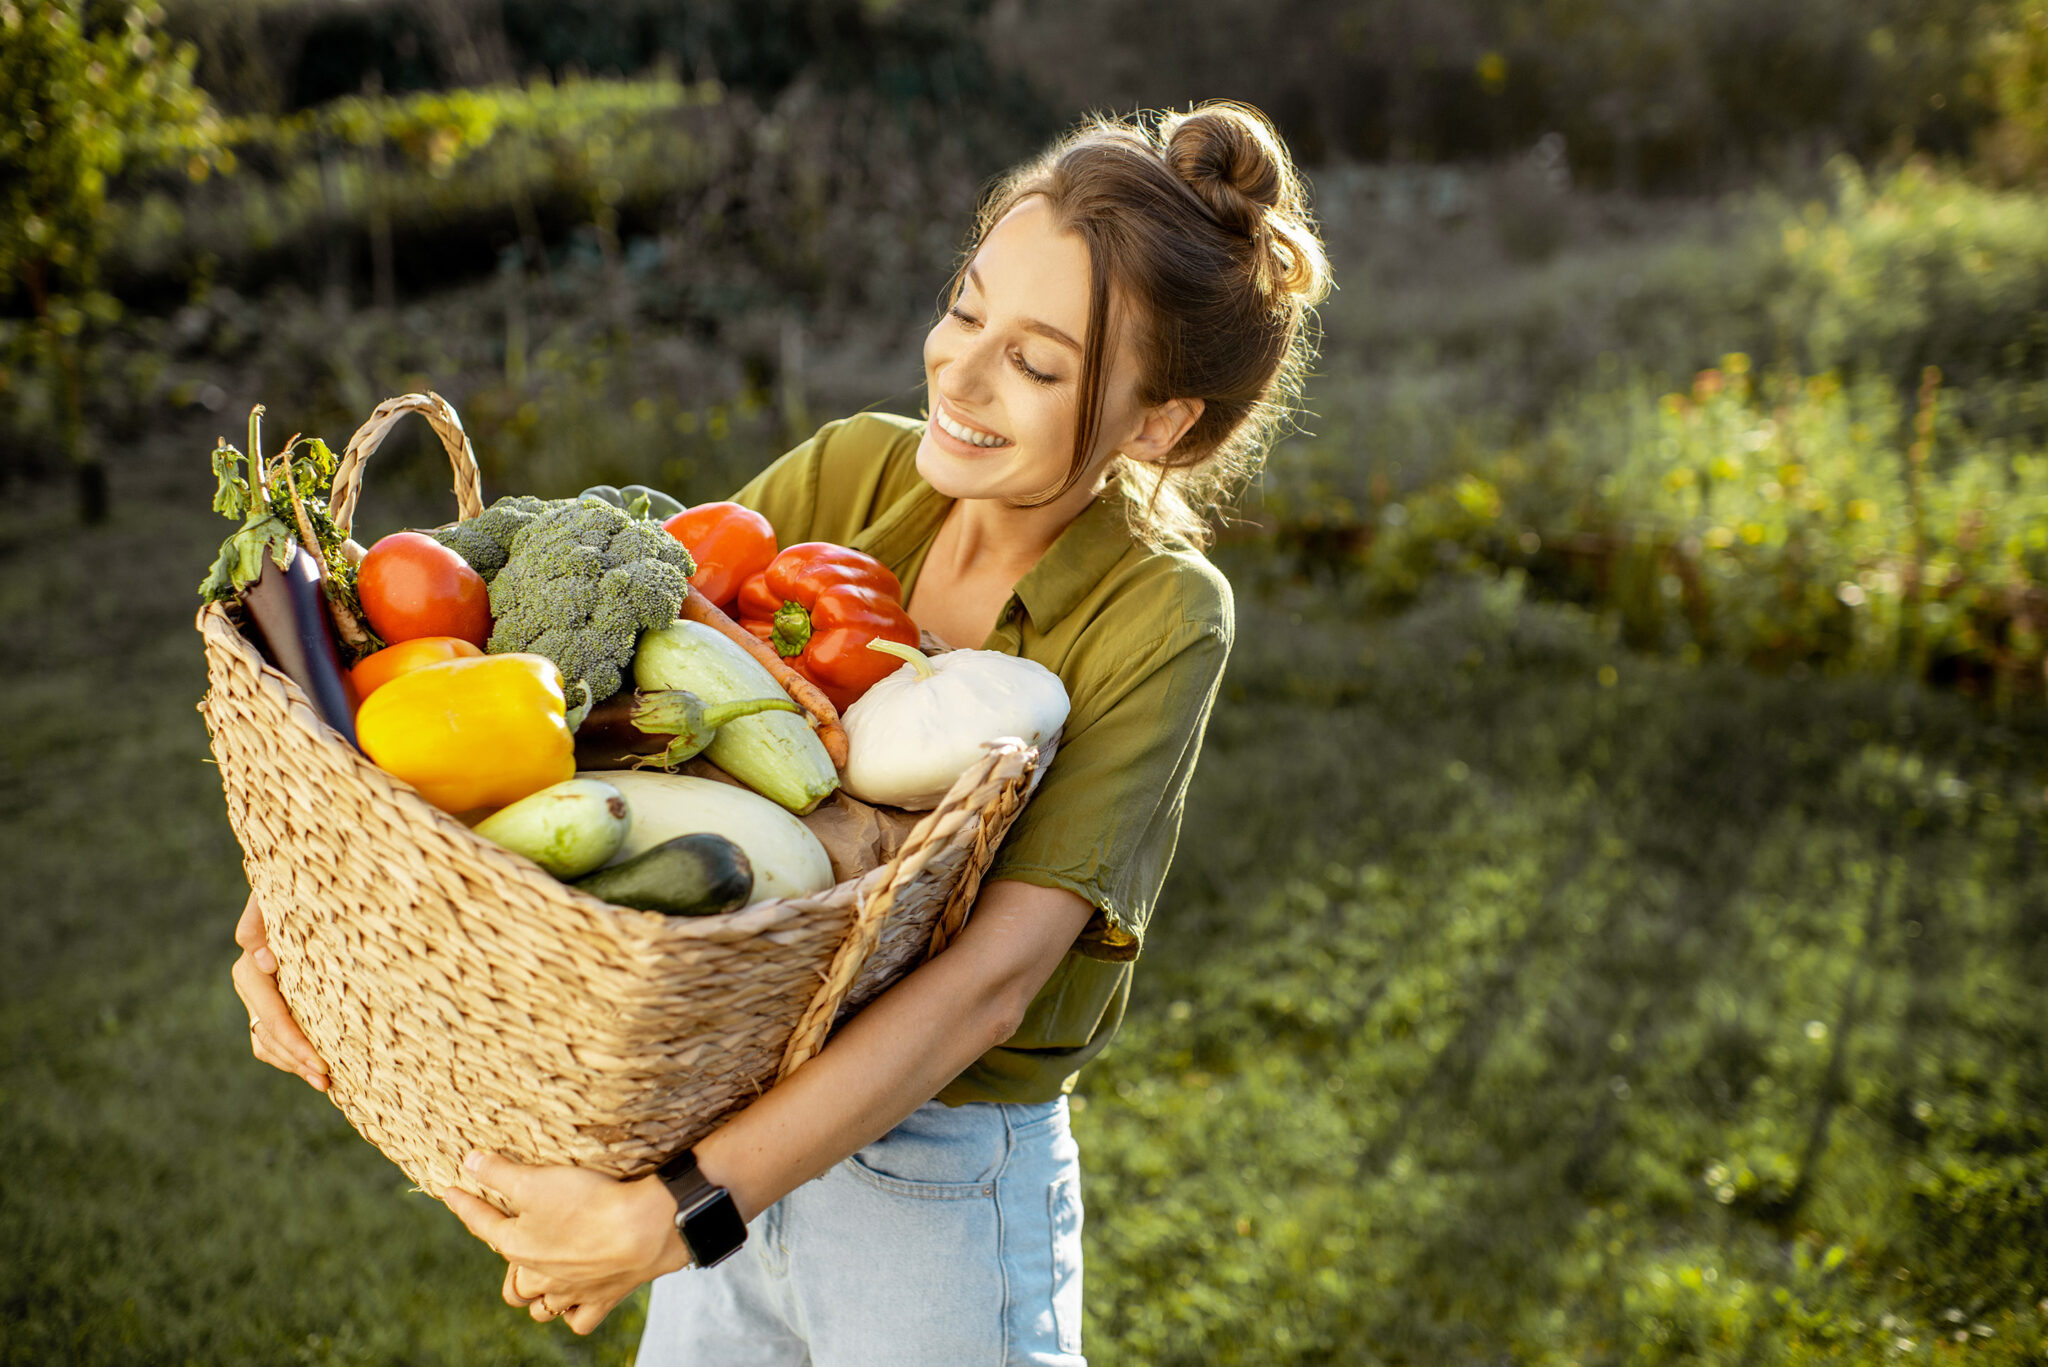 Survey: Younger people are more committed than their elderly to supporting sustainable food